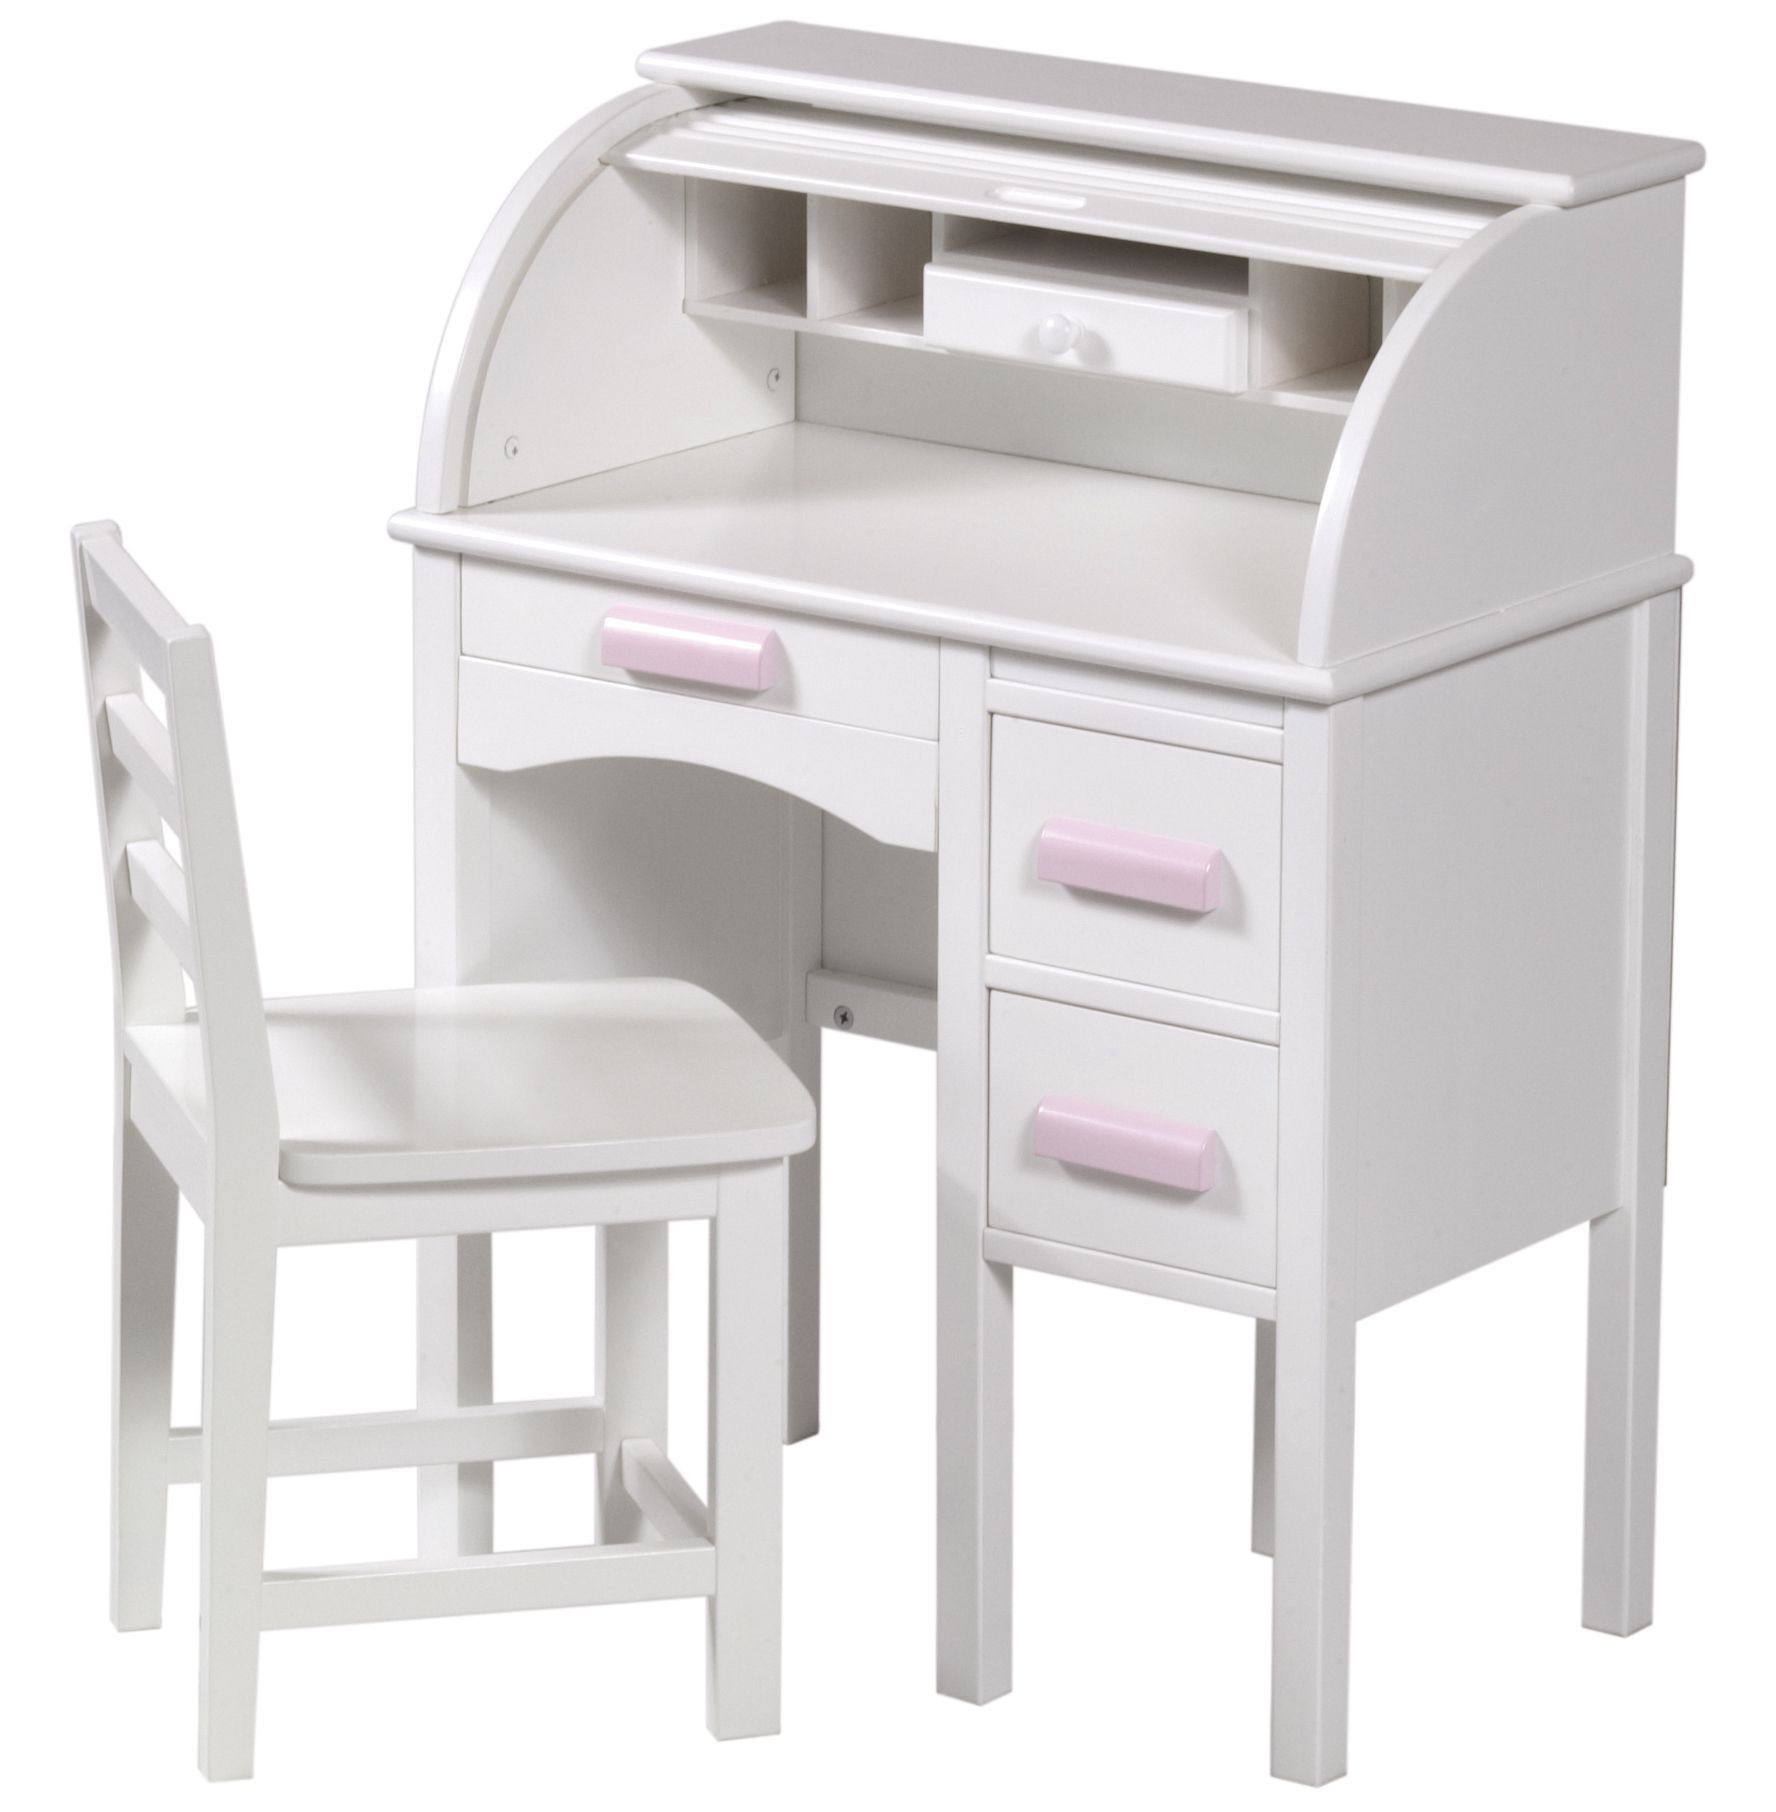 Kids White Desk Chair
 Tips For Buying a Childrens Desk goodworksfurniture